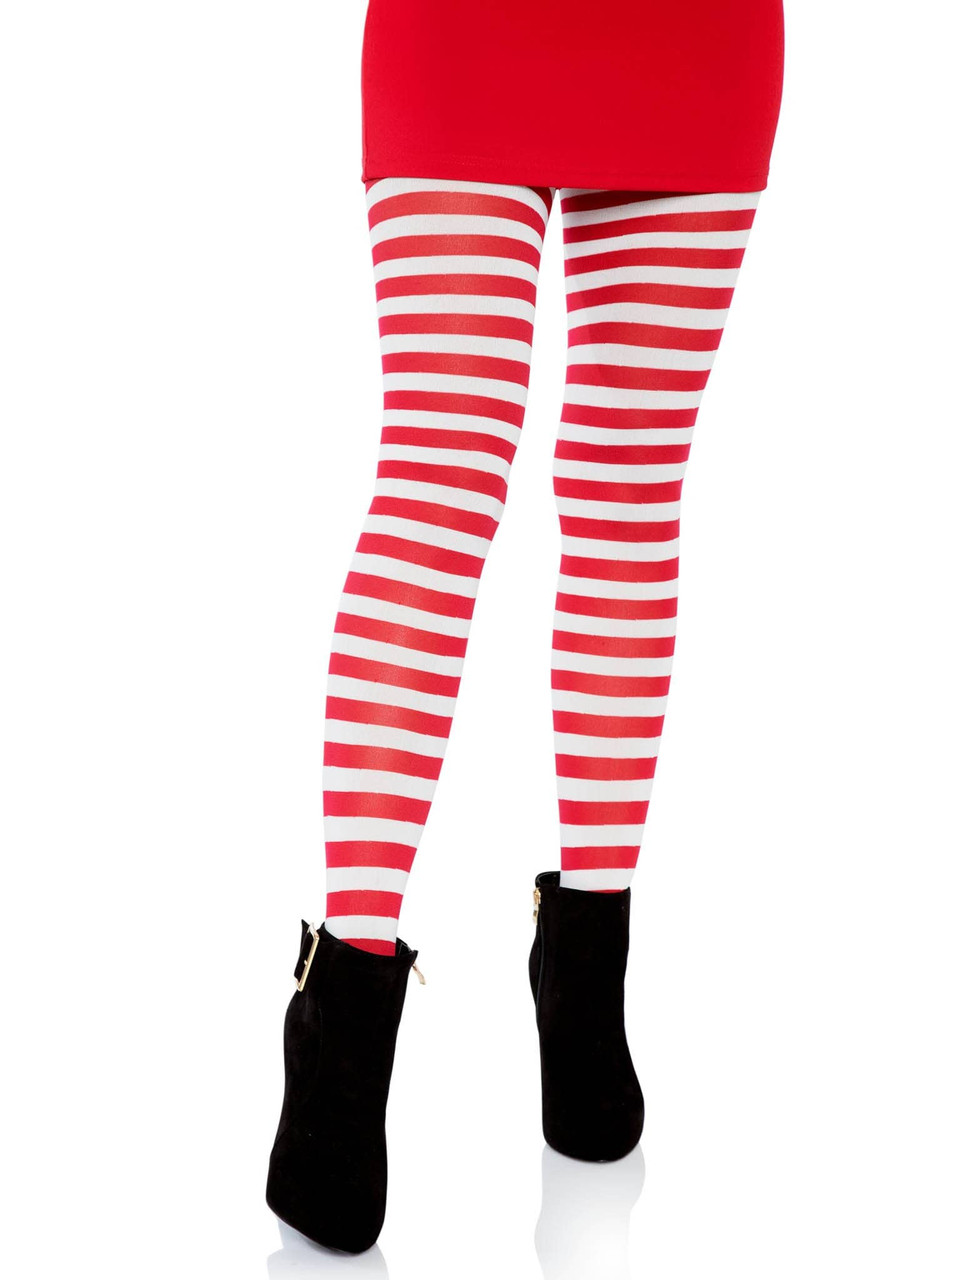  Black & White Striped Witch Tights